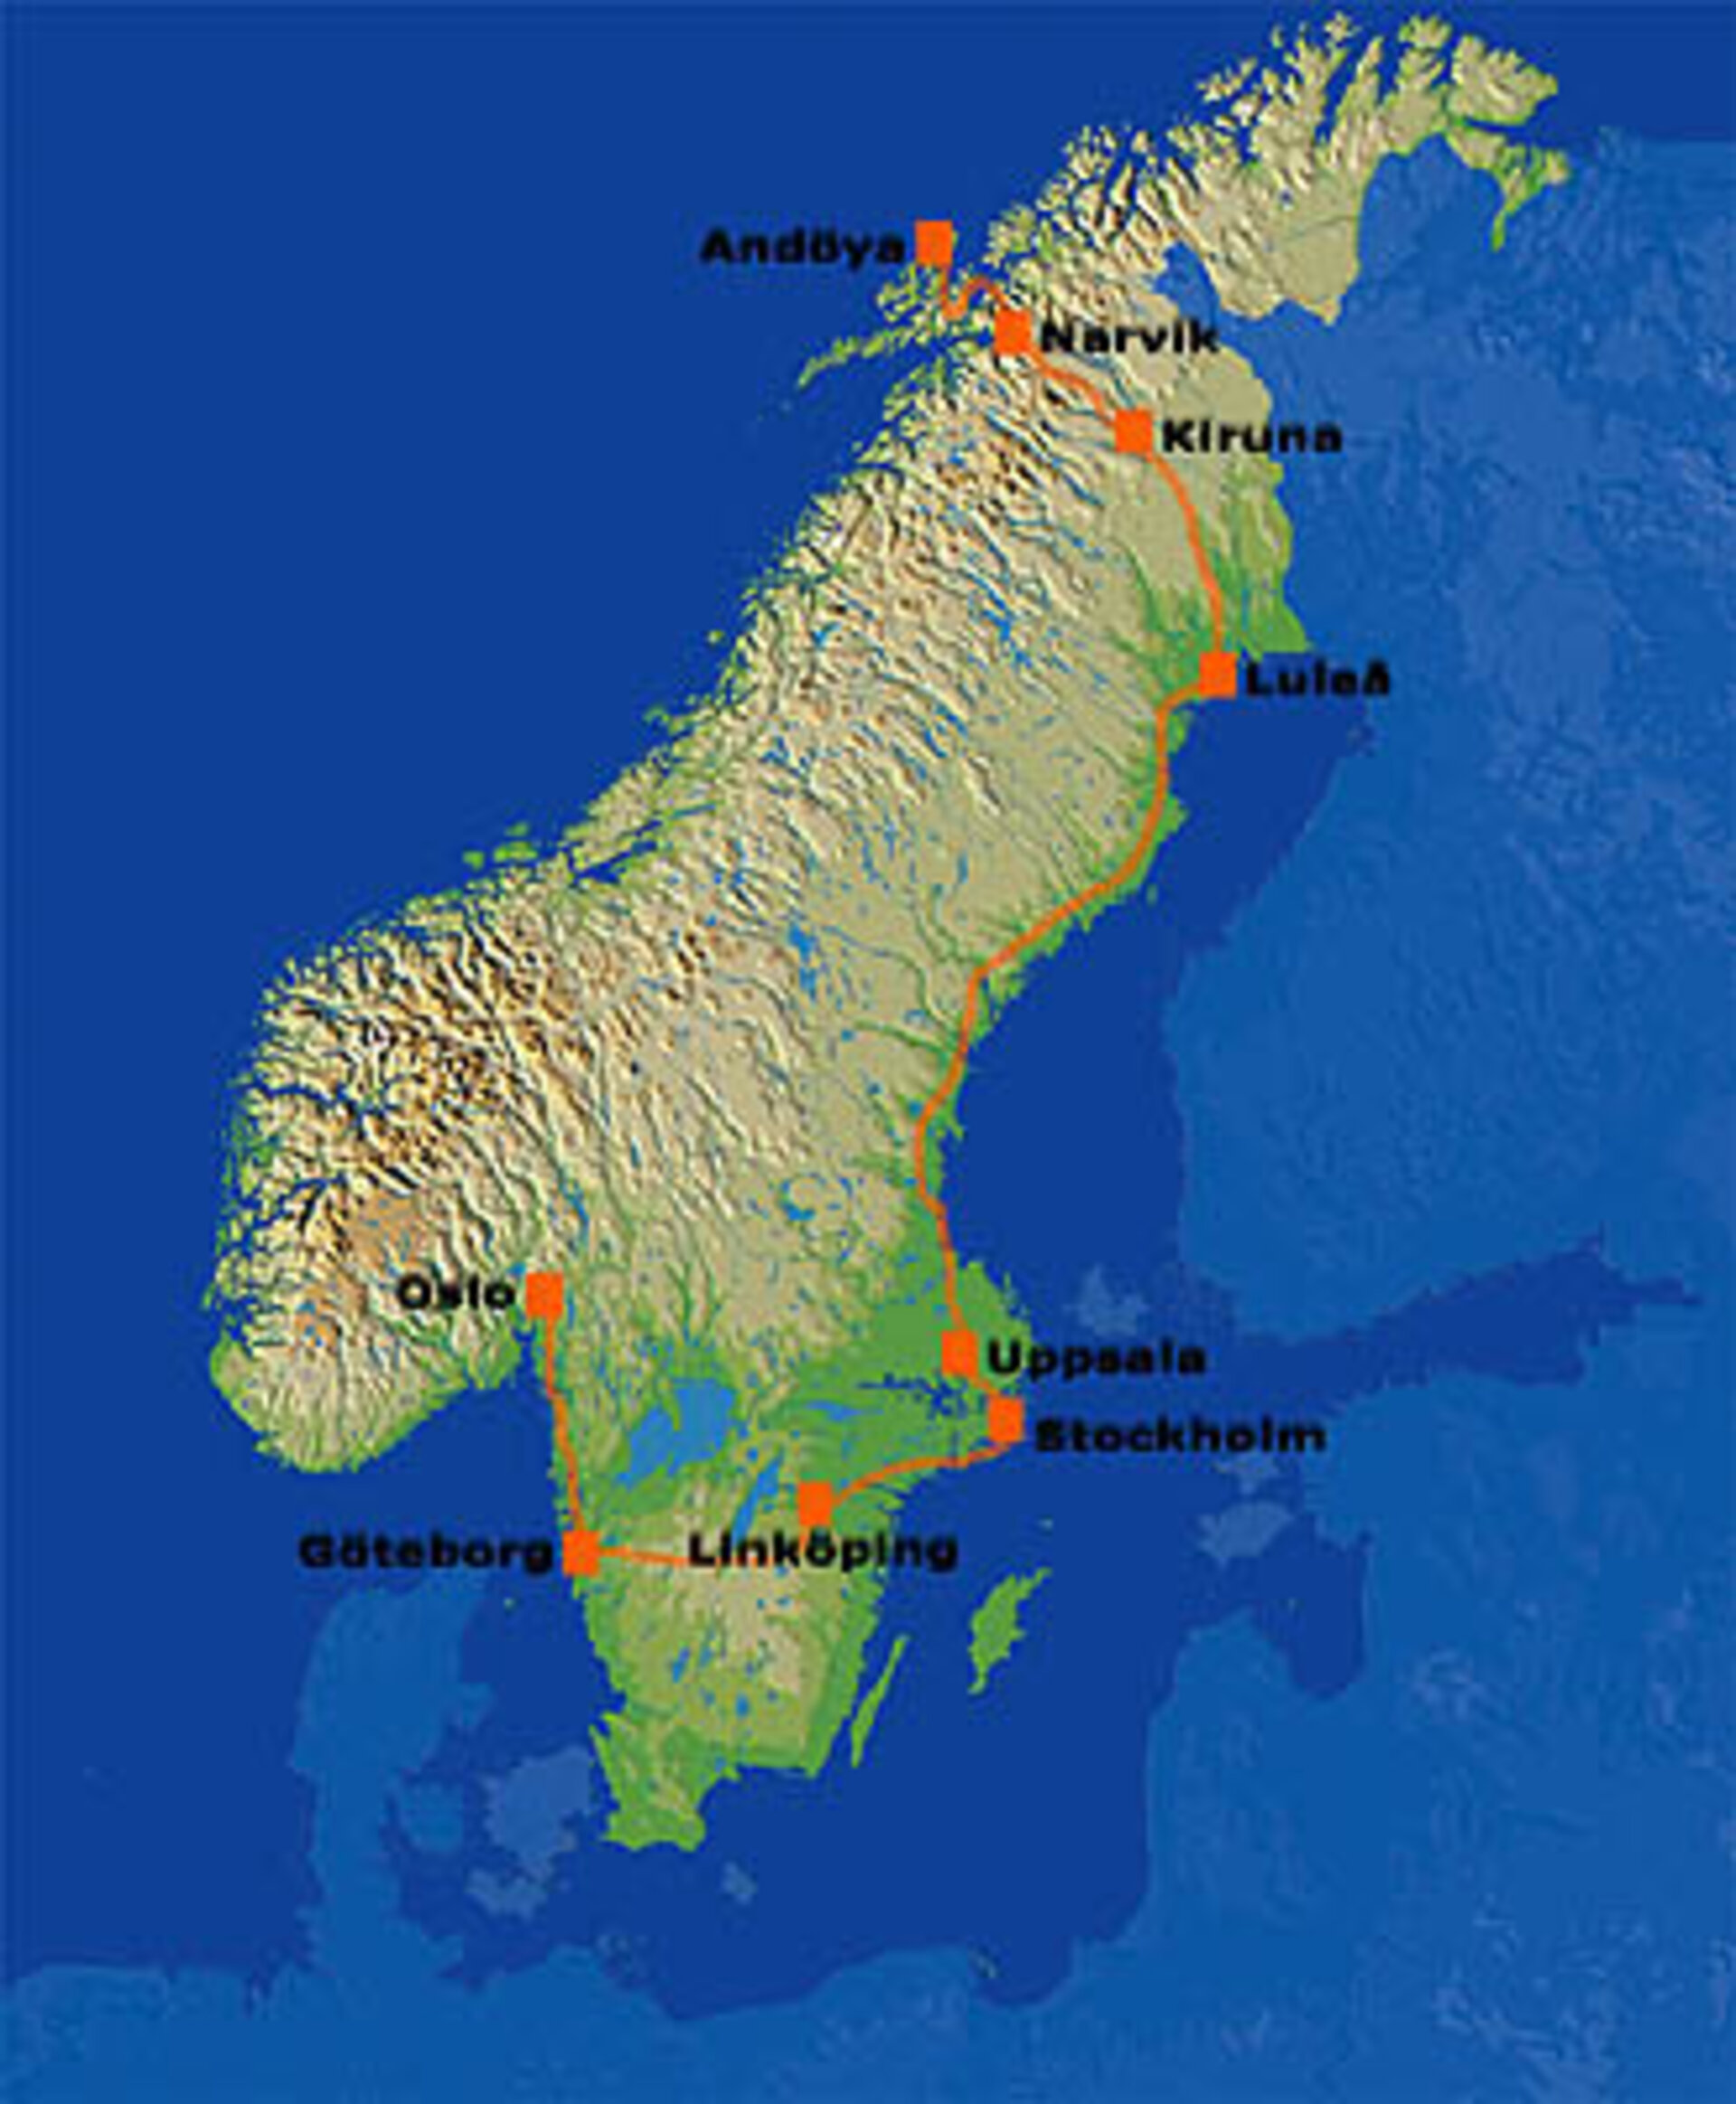 Nuna 2 in Norway and Sweden